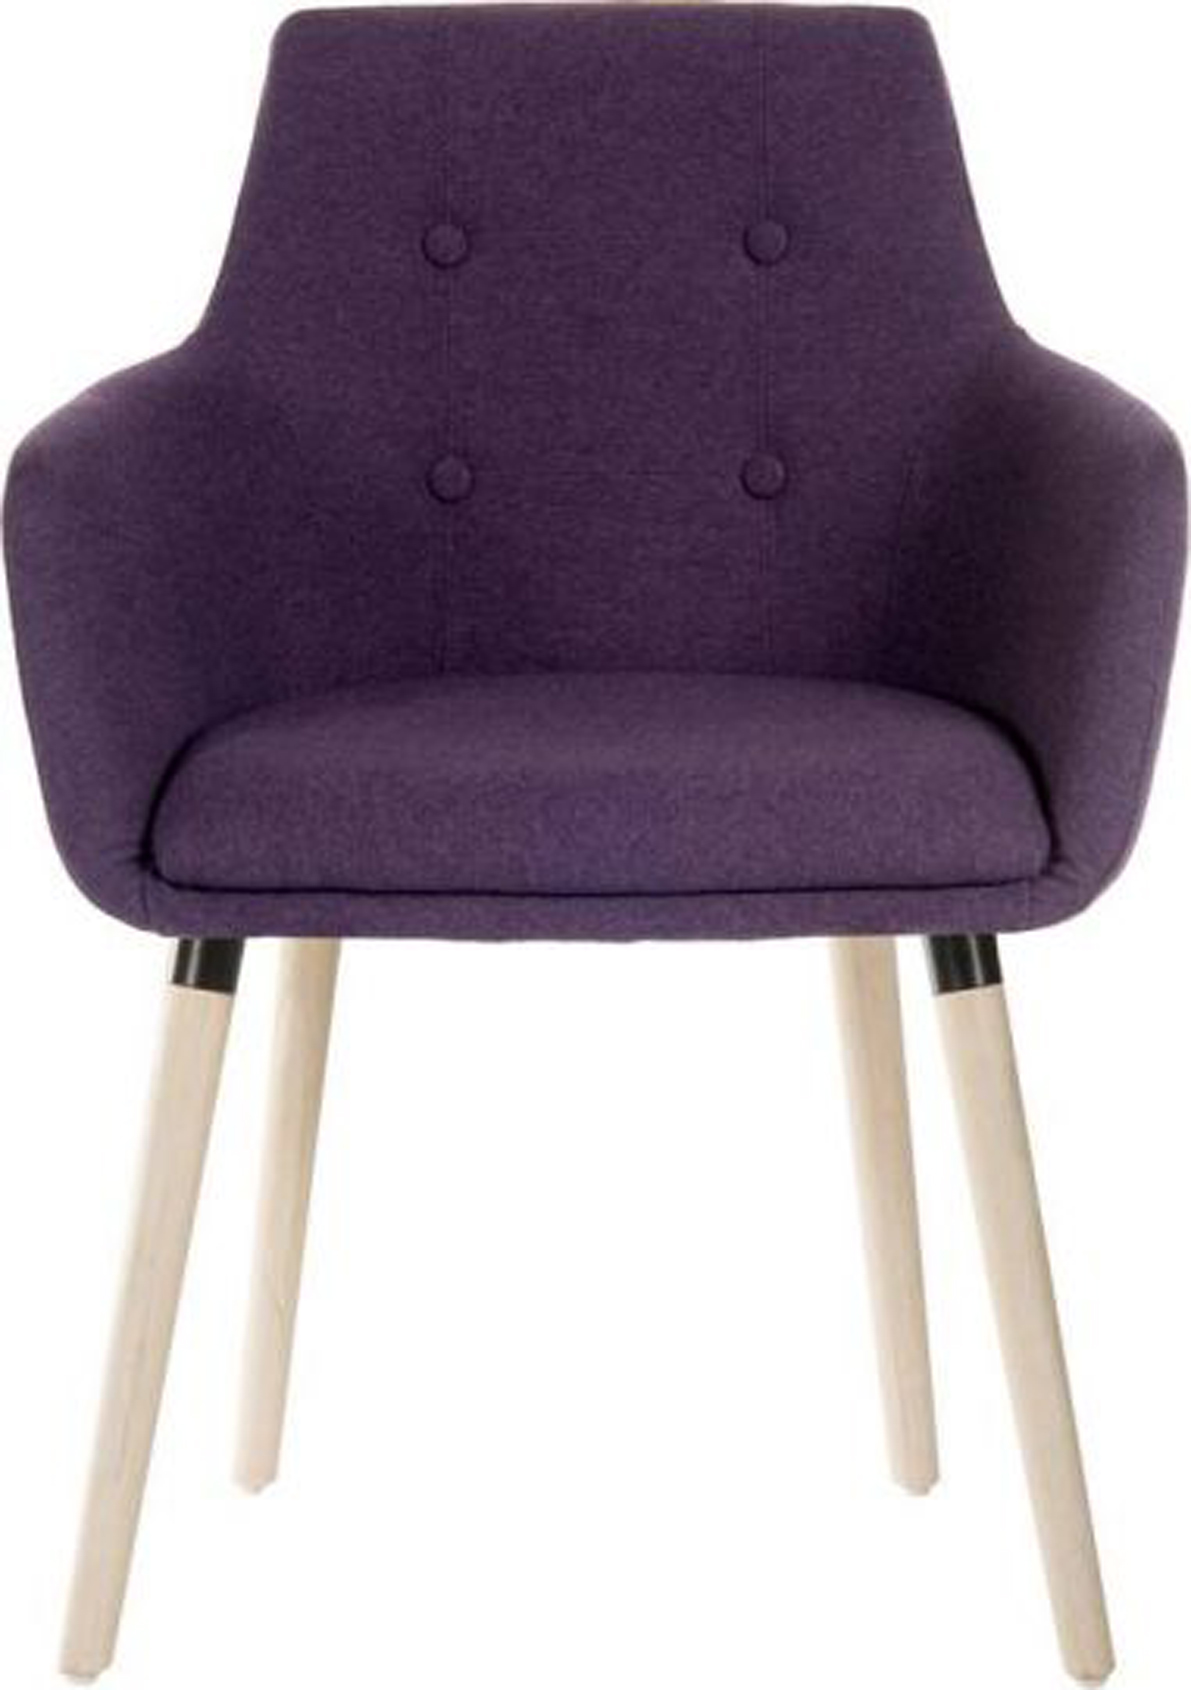 Upholstered Reception Chair - Purple